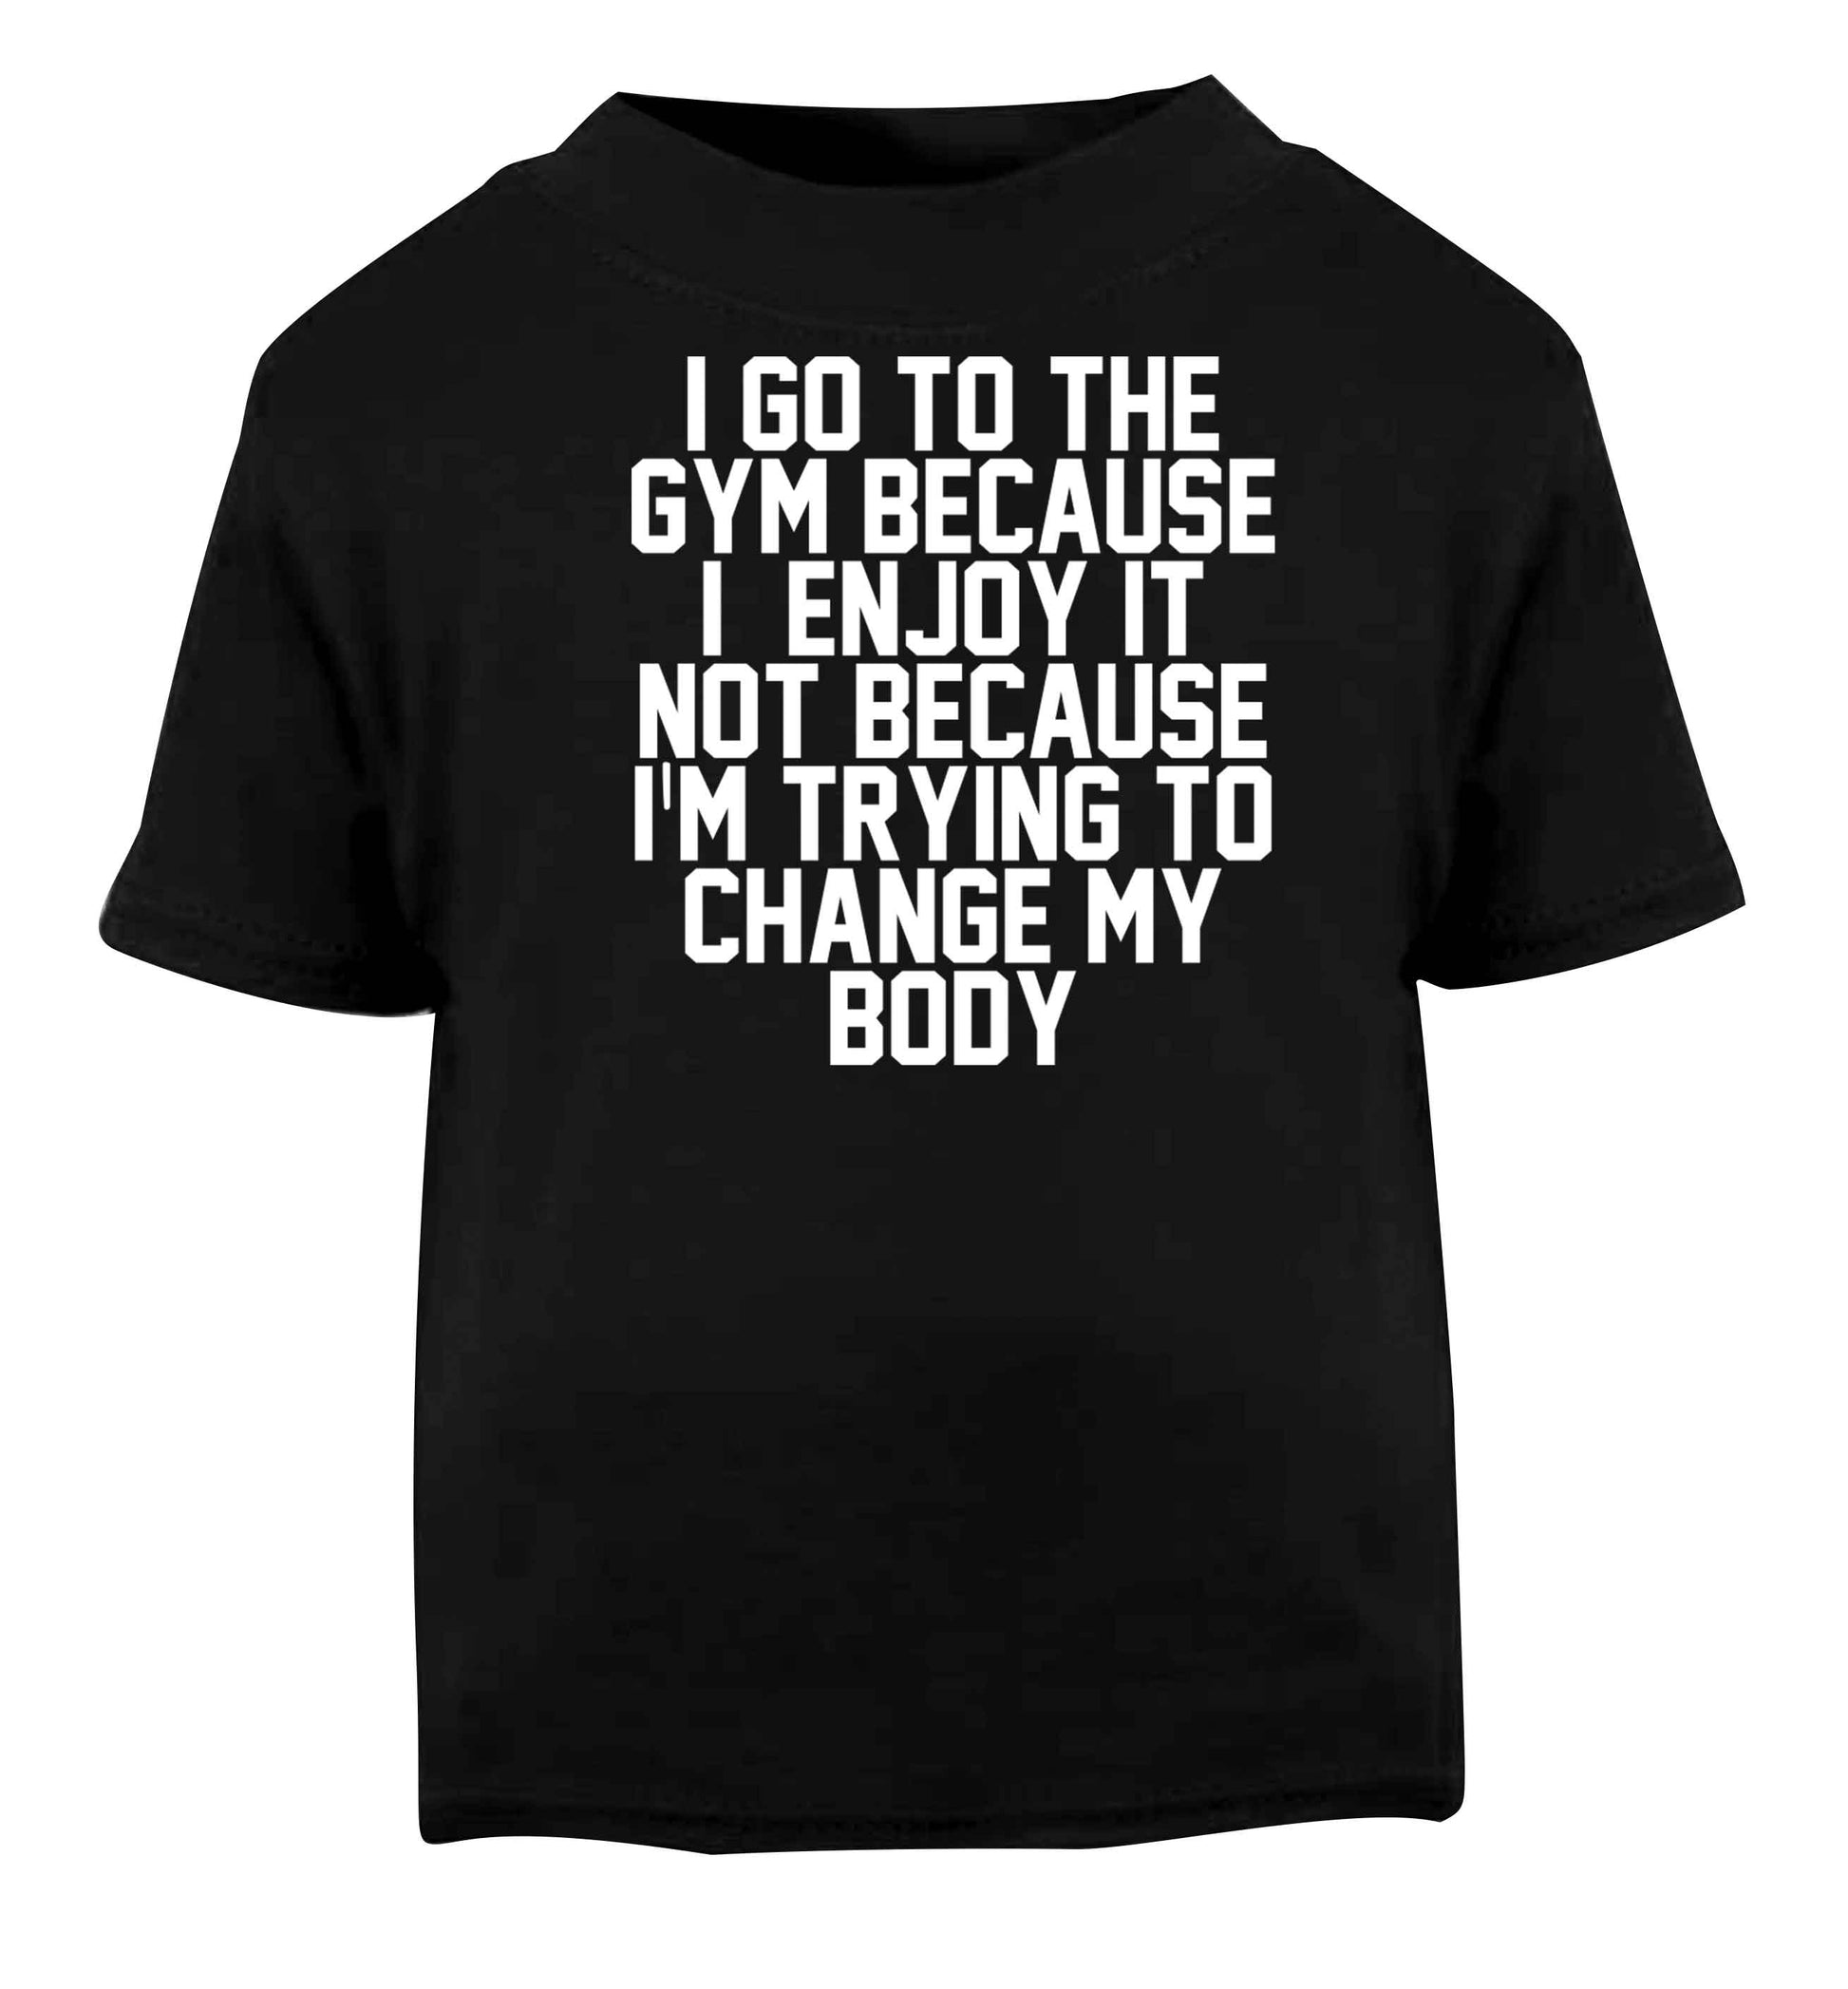 I go to the gym because I enjoy it not because I'm trying to change my body Black baby toddler Tshirt 2 years